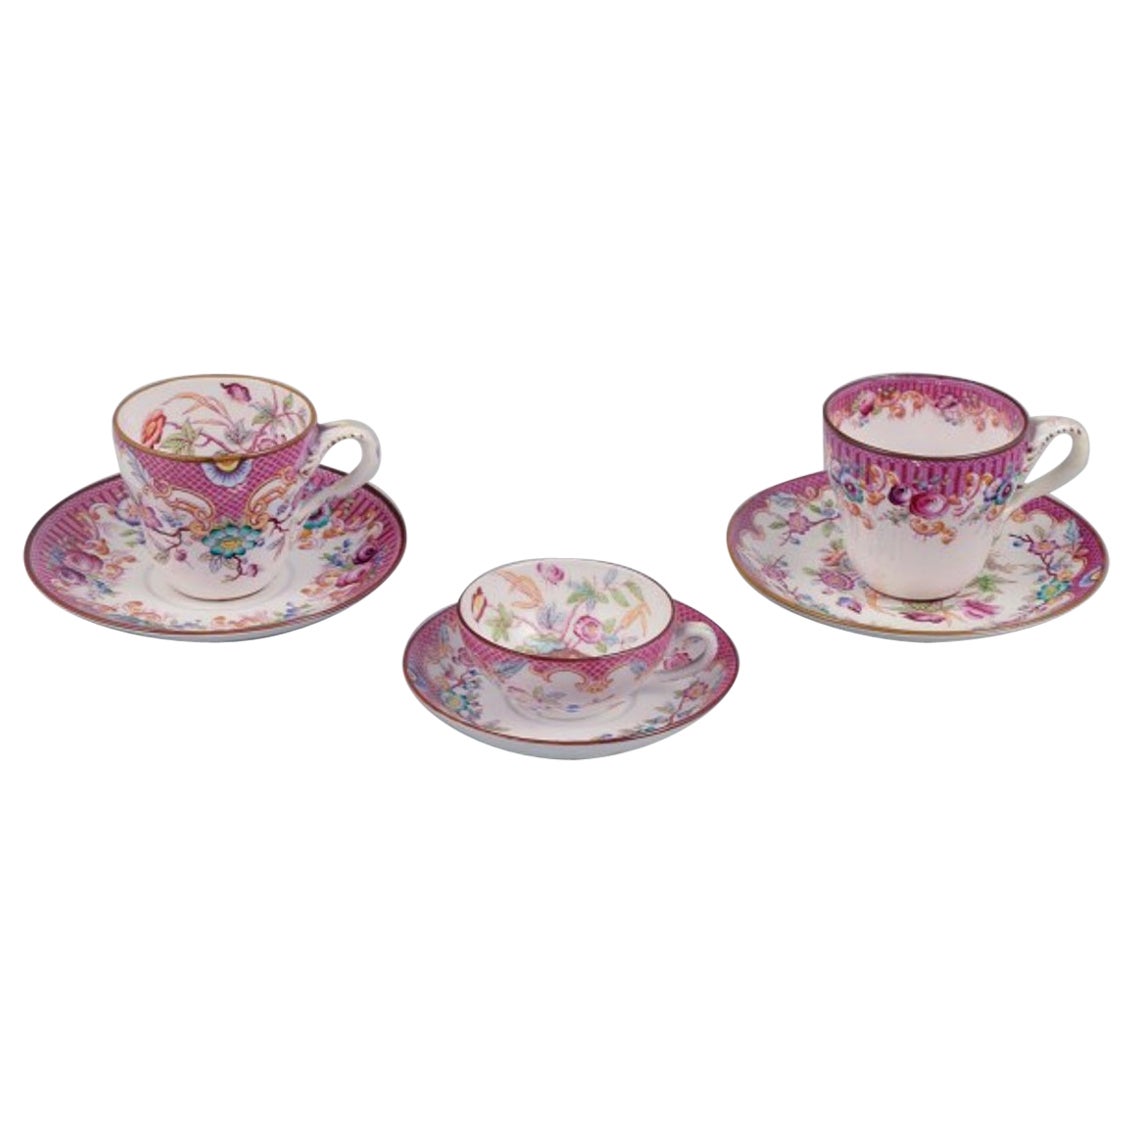 Sarreguemines, France, Two Pairs of Coffee Cups and a Tea Cup in Porcelain For Sale